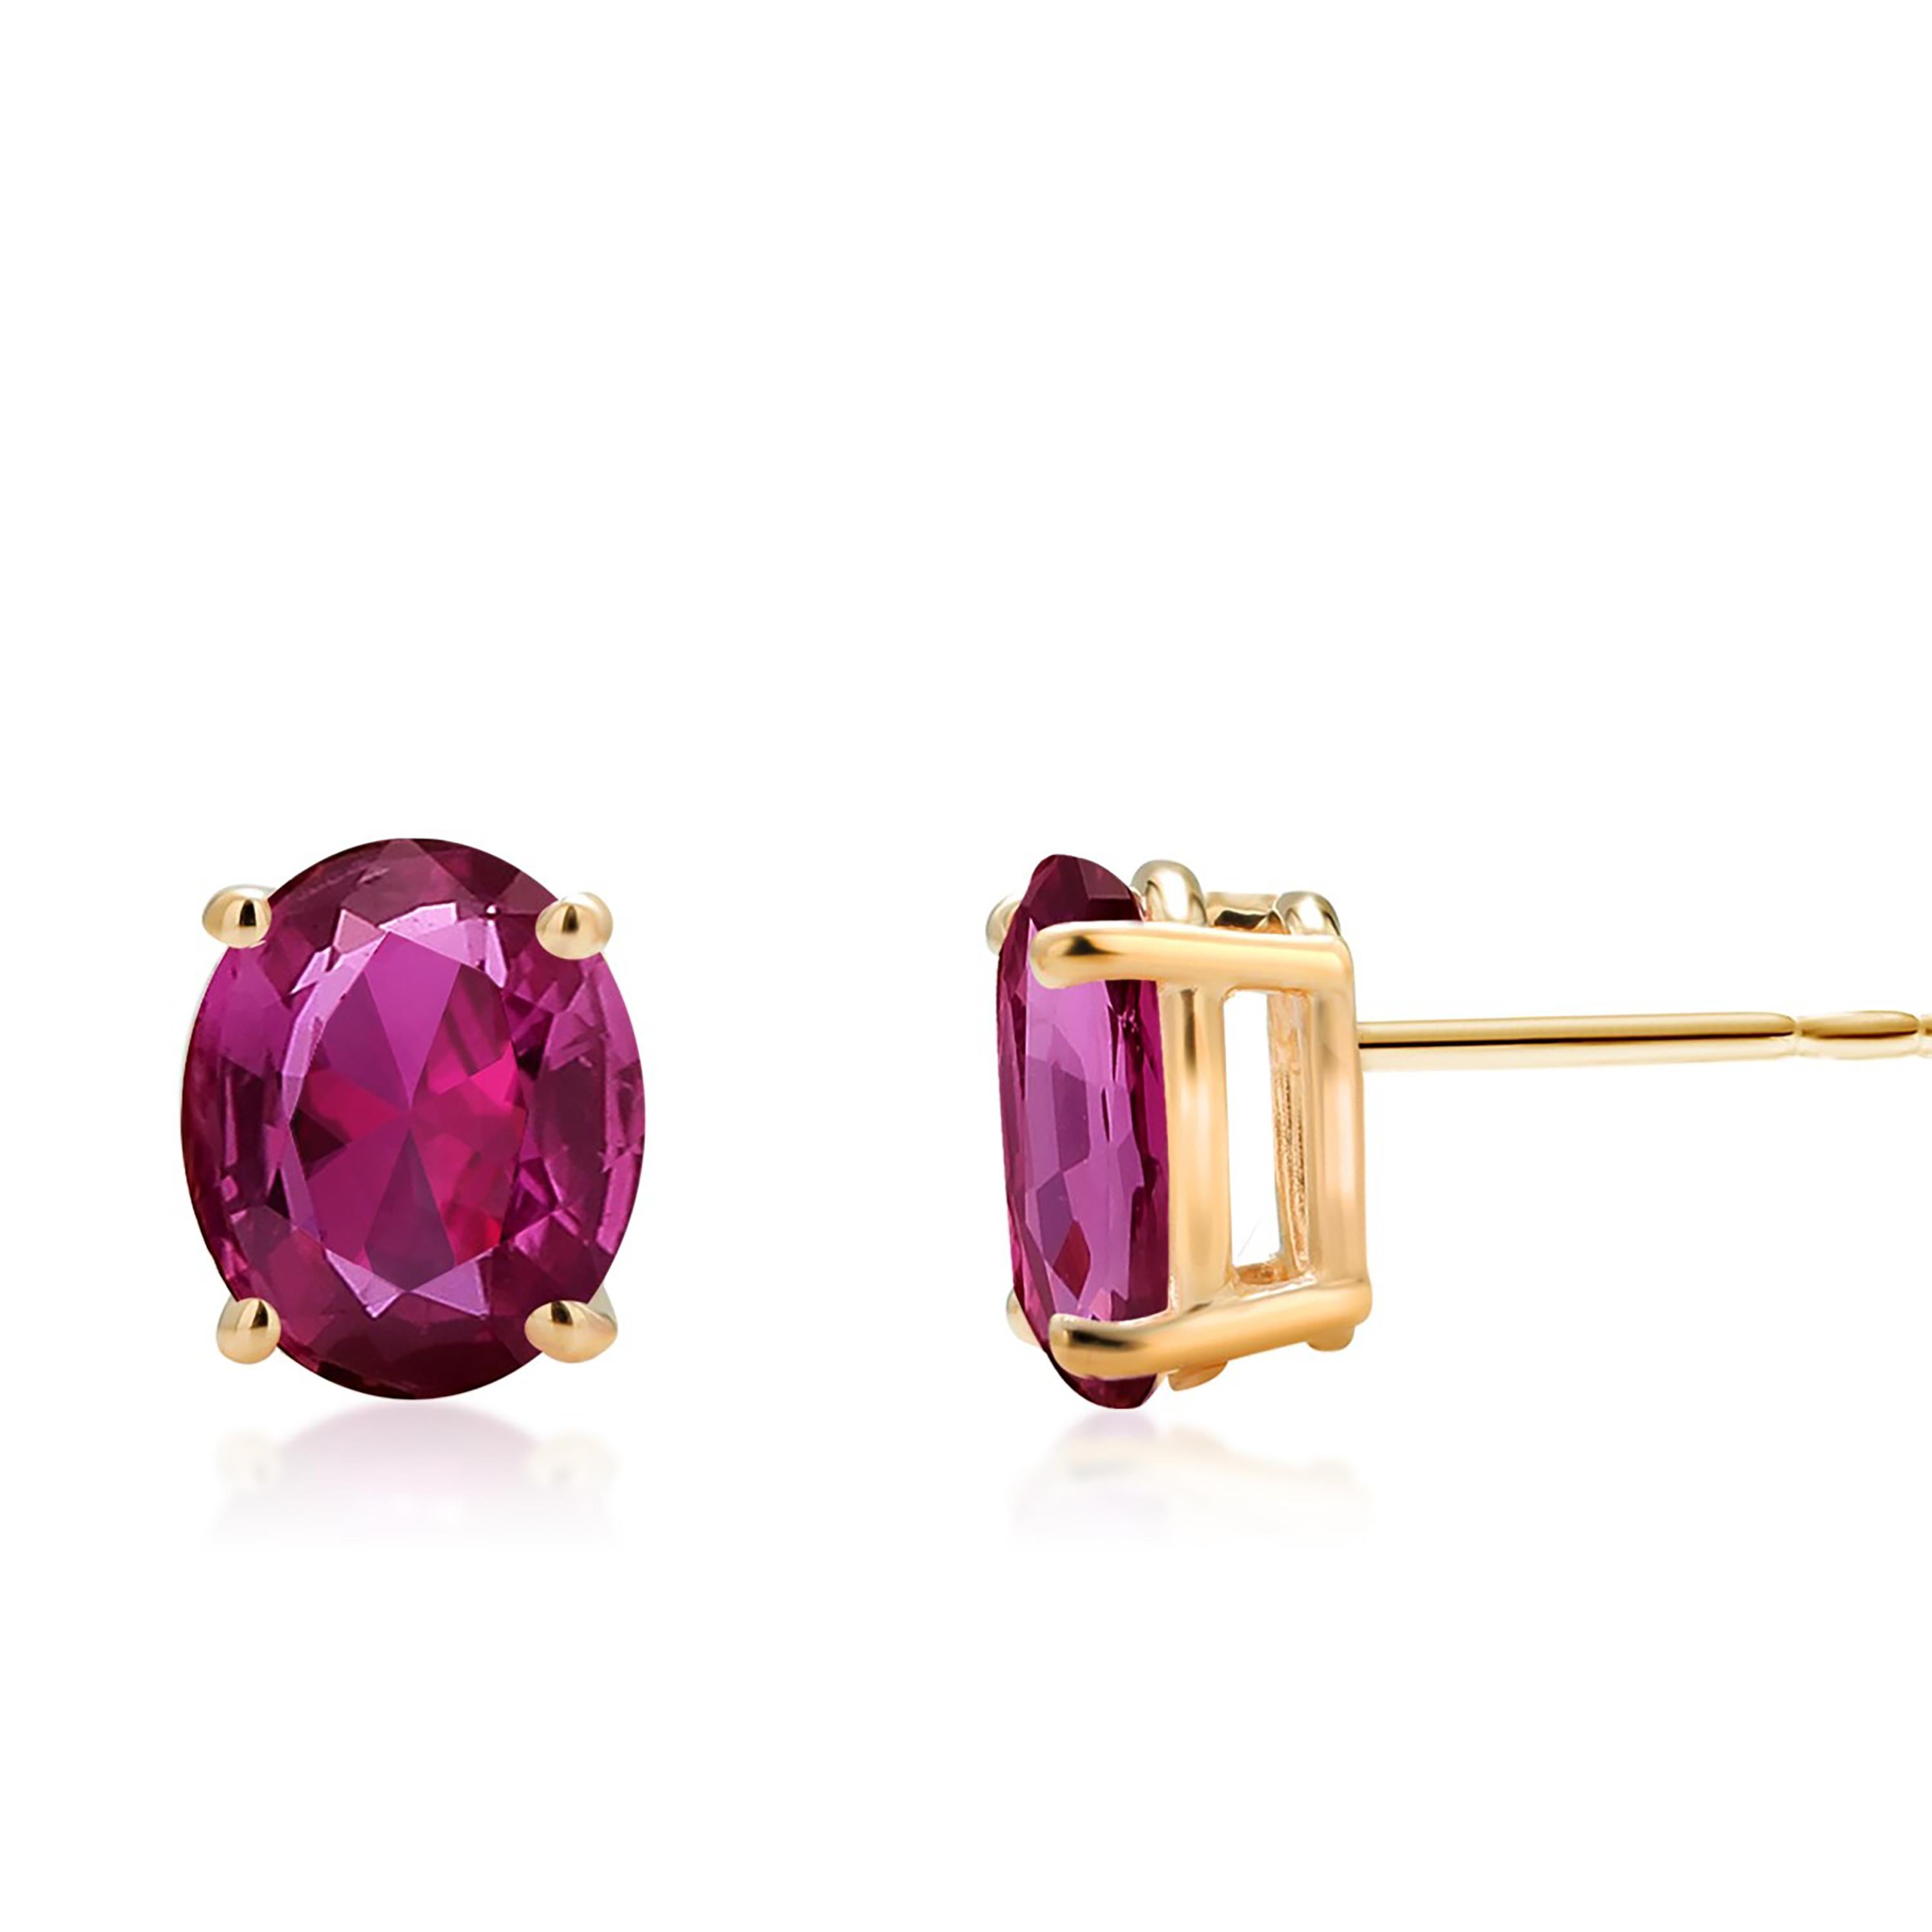 Oval Shaped Mini Rubies Set in Yellow Gold Stud Earrings For Sale 1